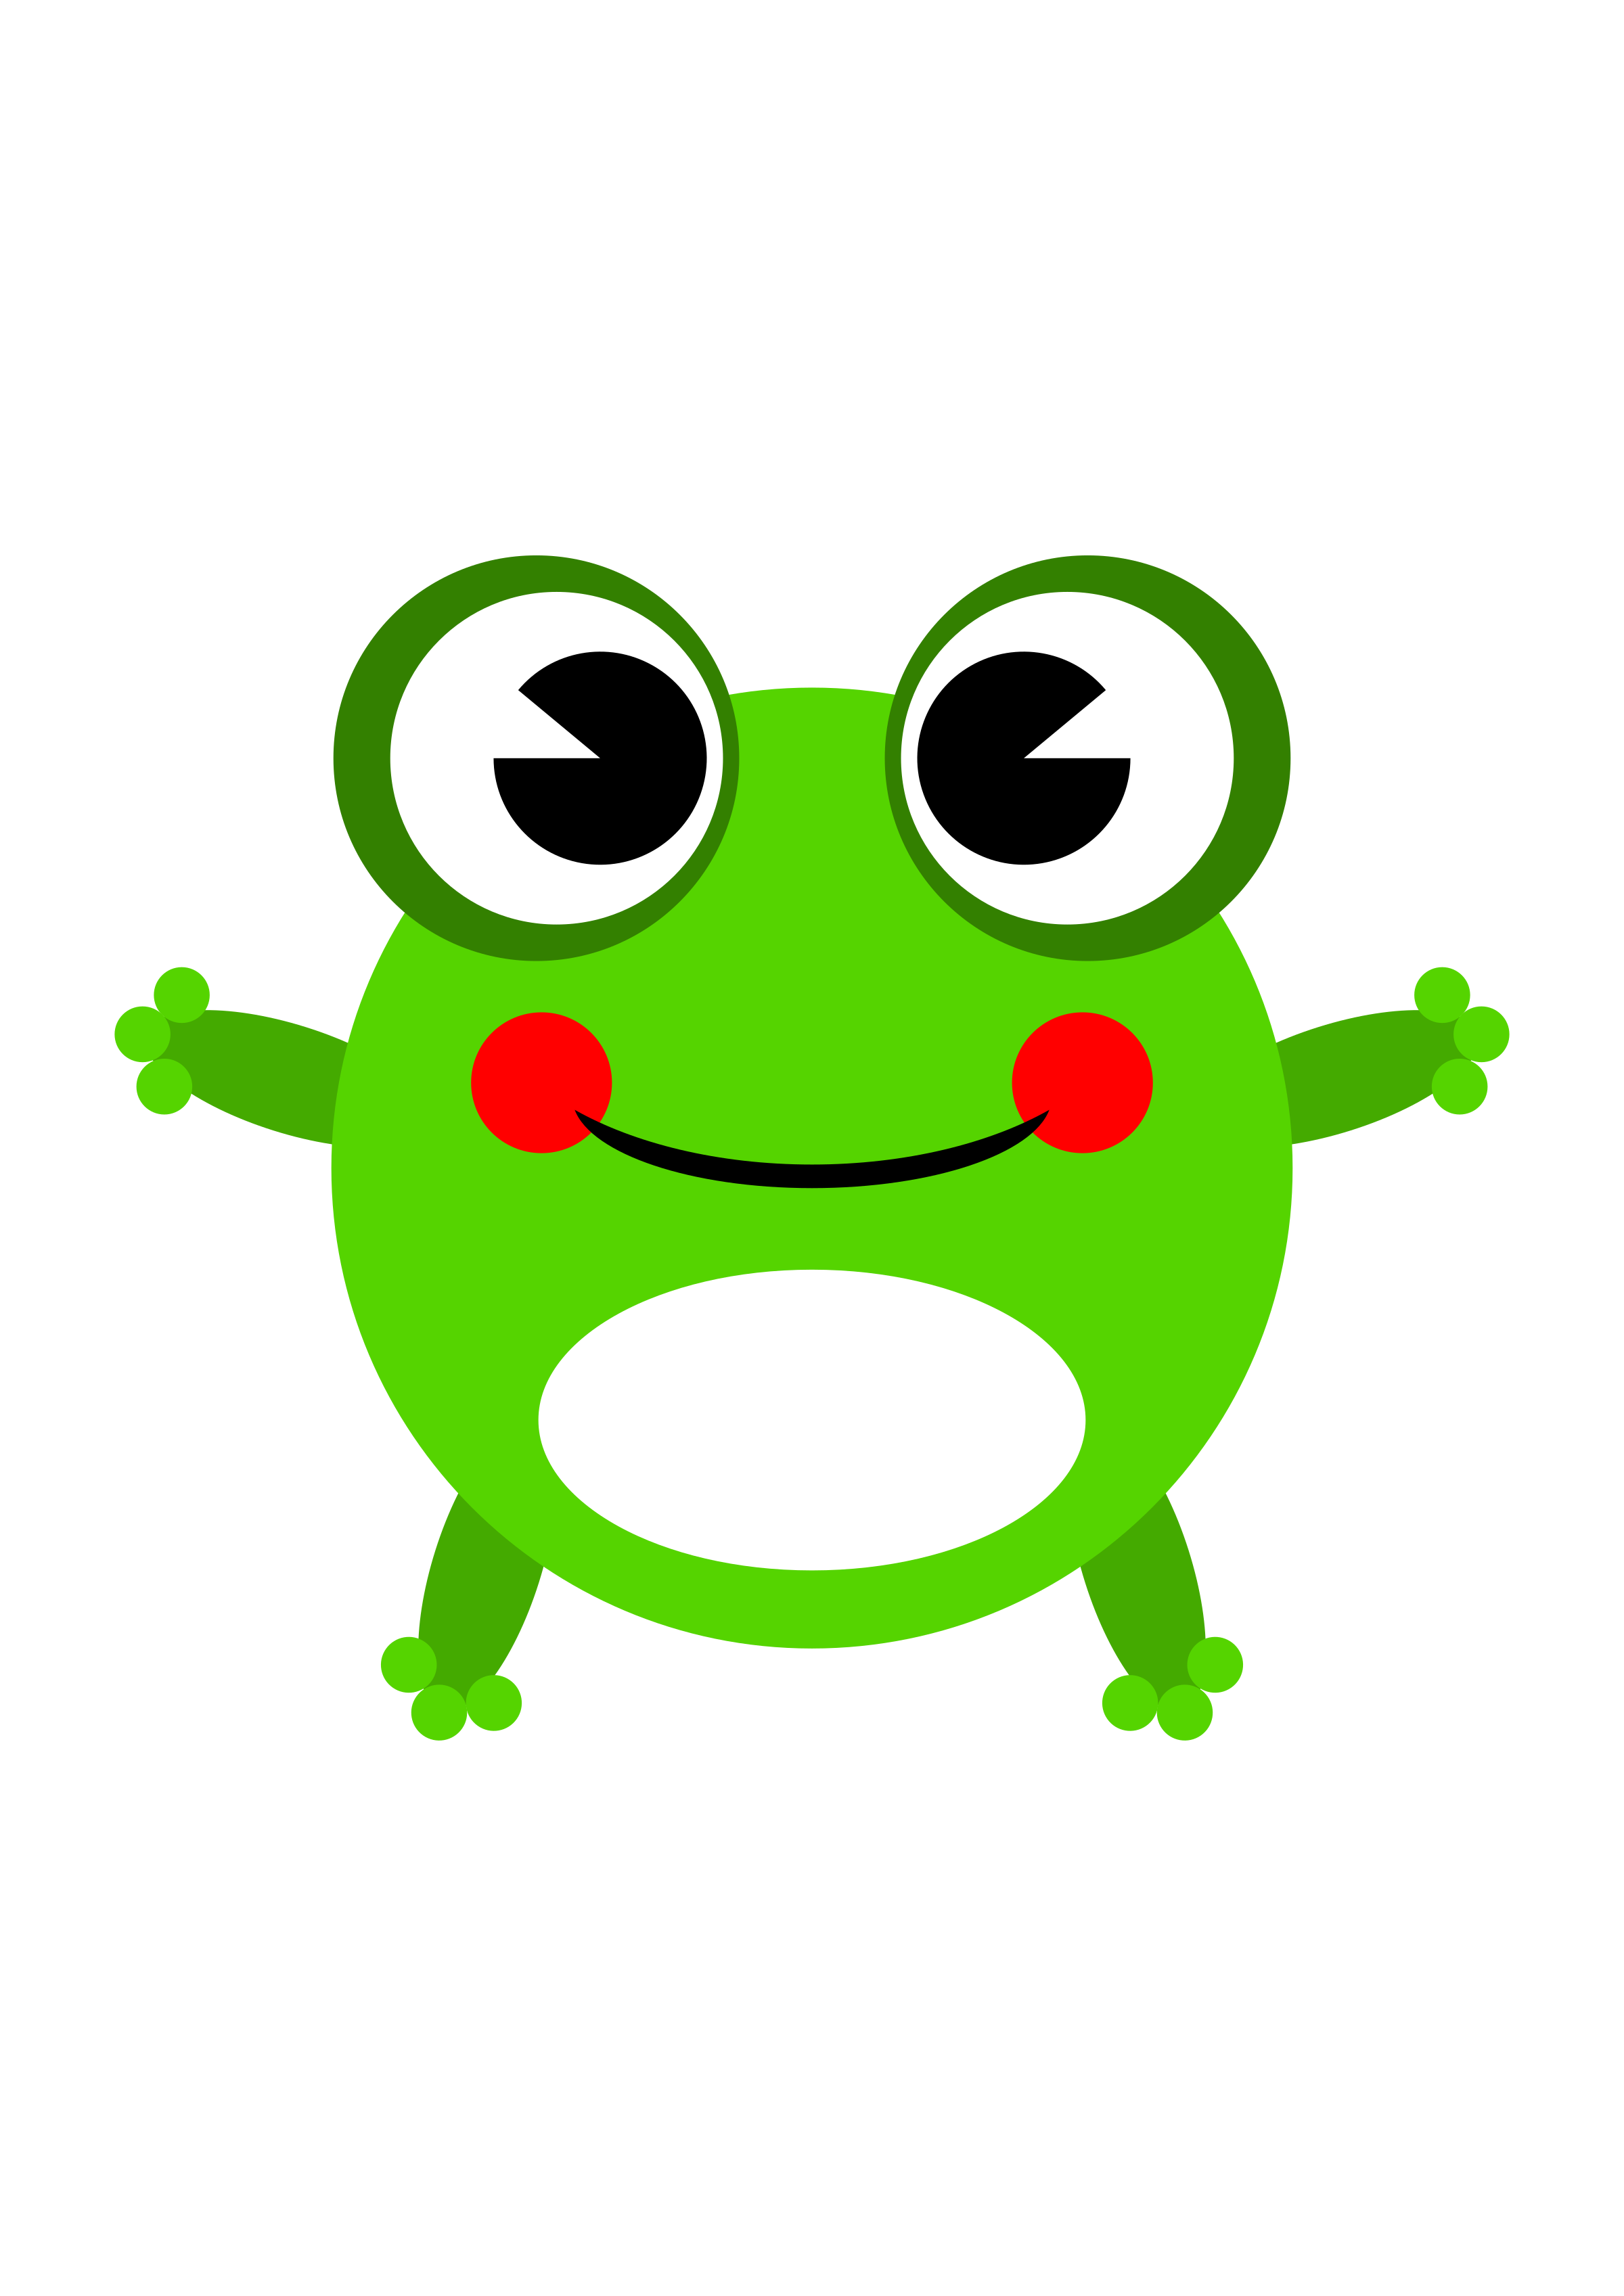 Animated Frogs Images | Free download on ClipArtMag